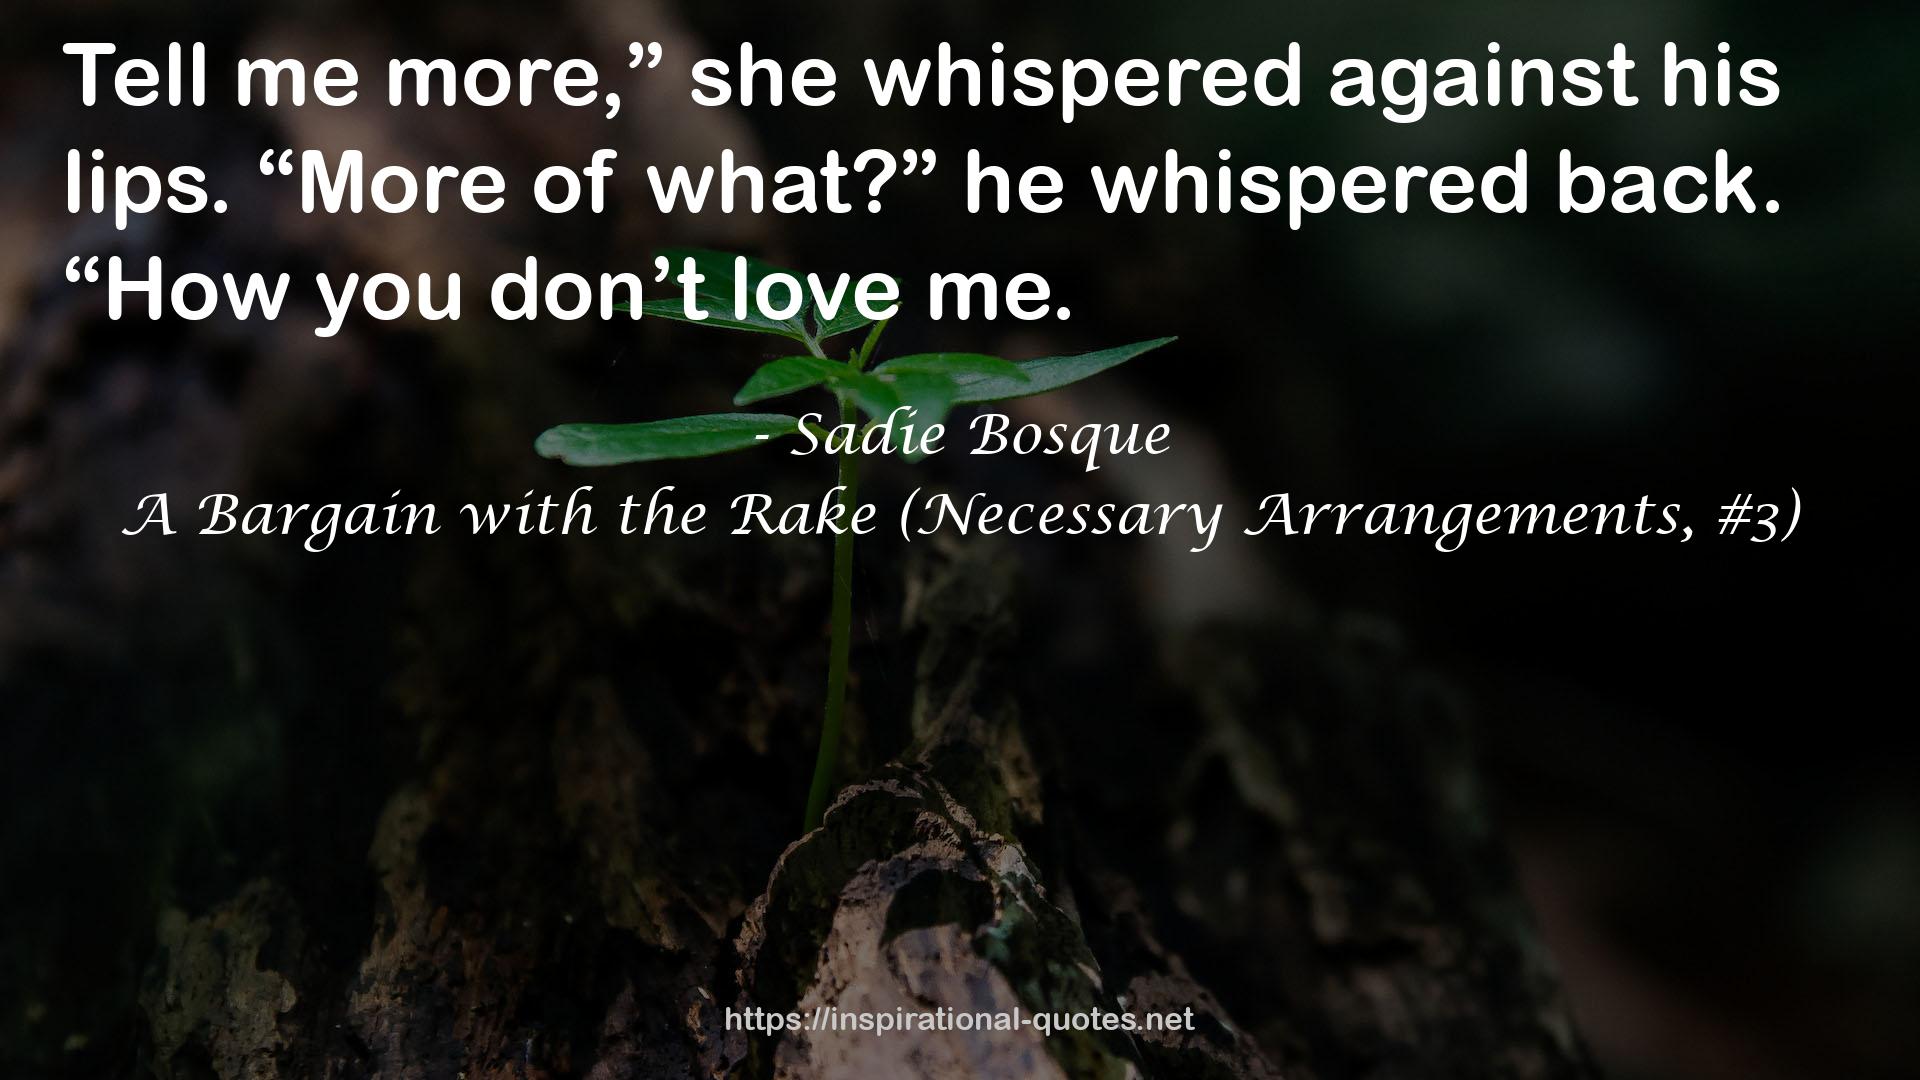 A Bargain with the Rake (Necessary Arrangements, #3) QUOTES